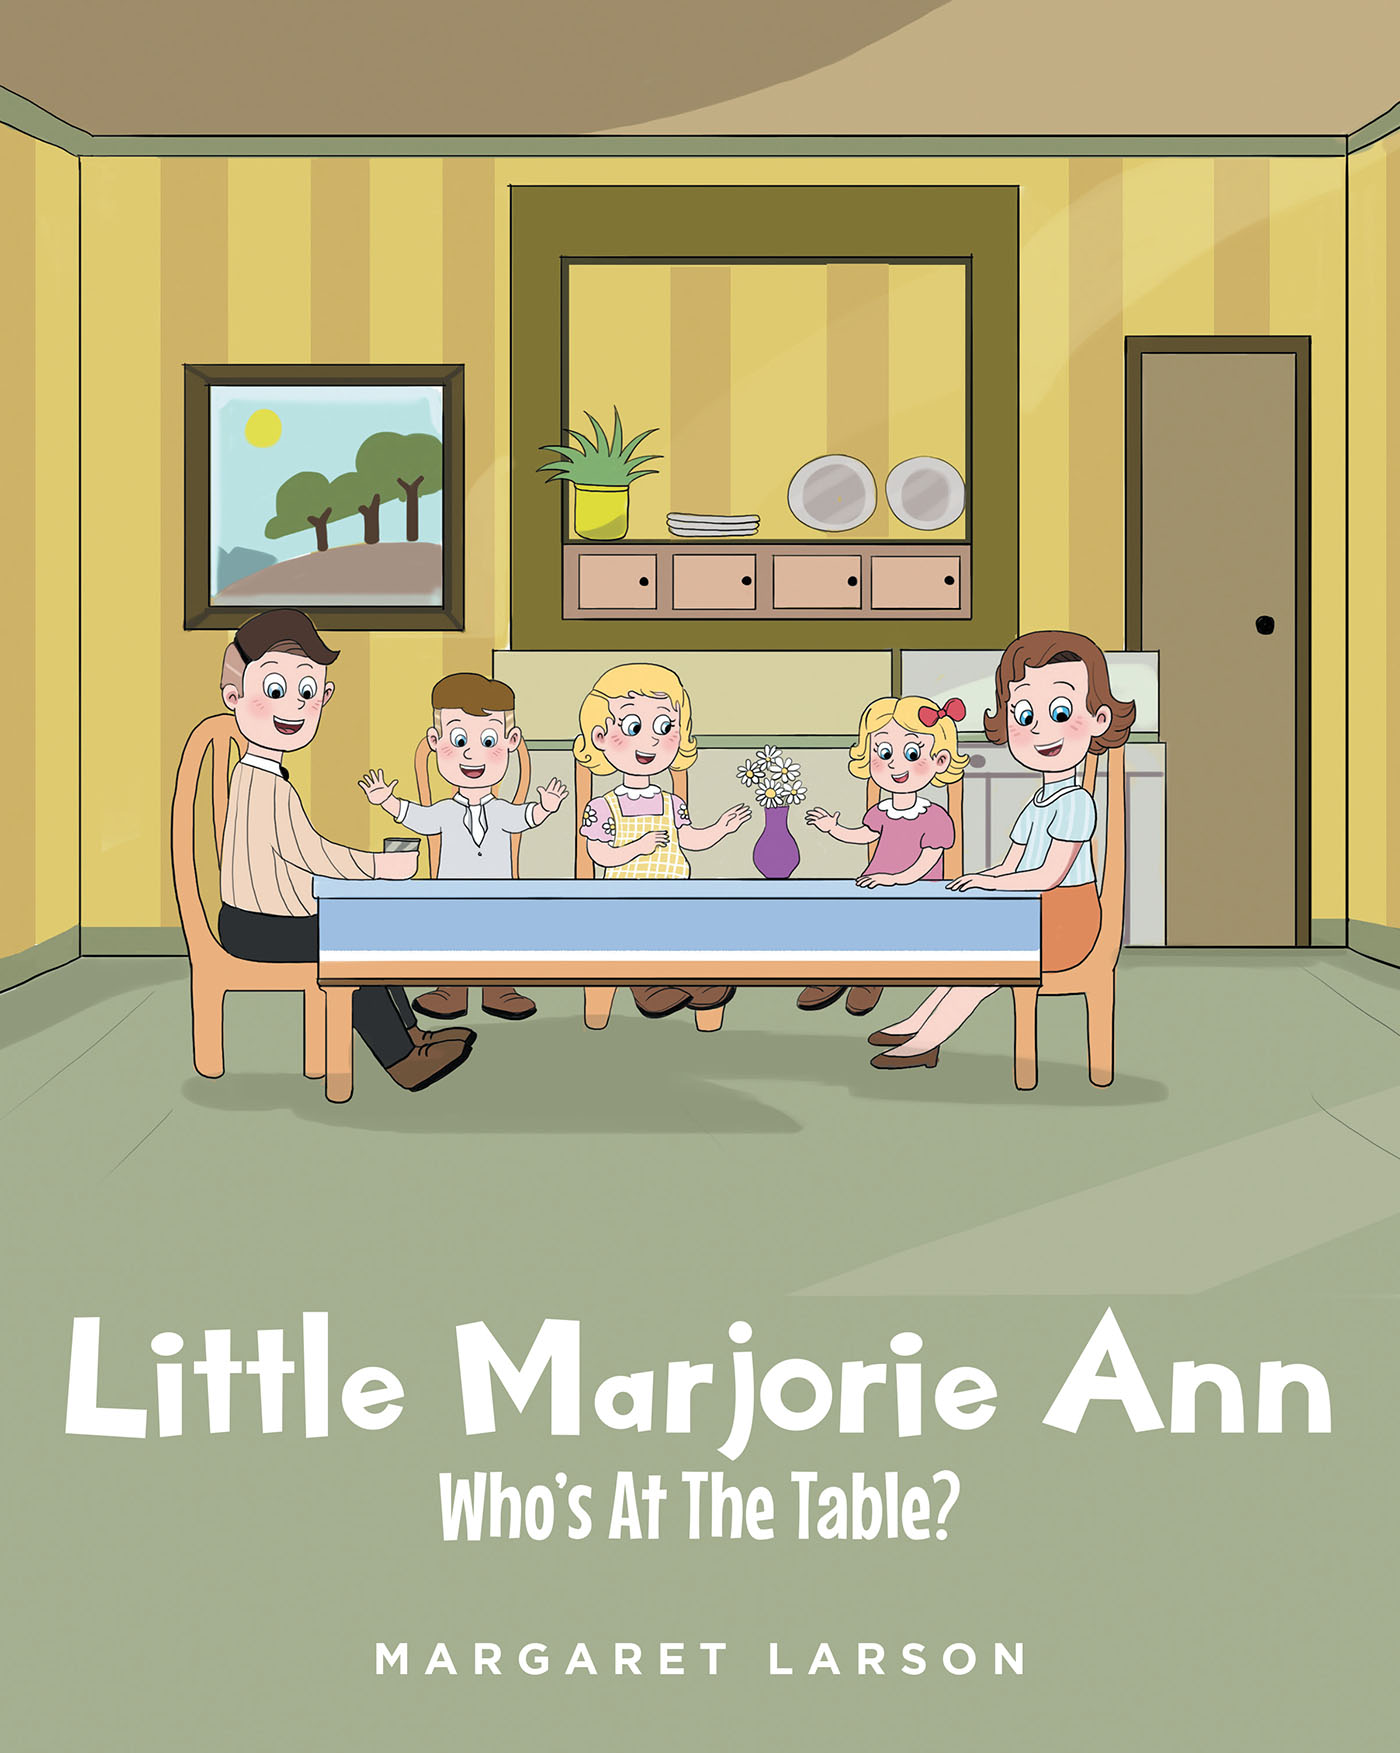 Margaret Larson’s New Book, "Little Marjorie Ann: Who's at the Table?" Is a Riveting Tale of a Little Girl and Her Family Who Invite a New Member Into Their Lives